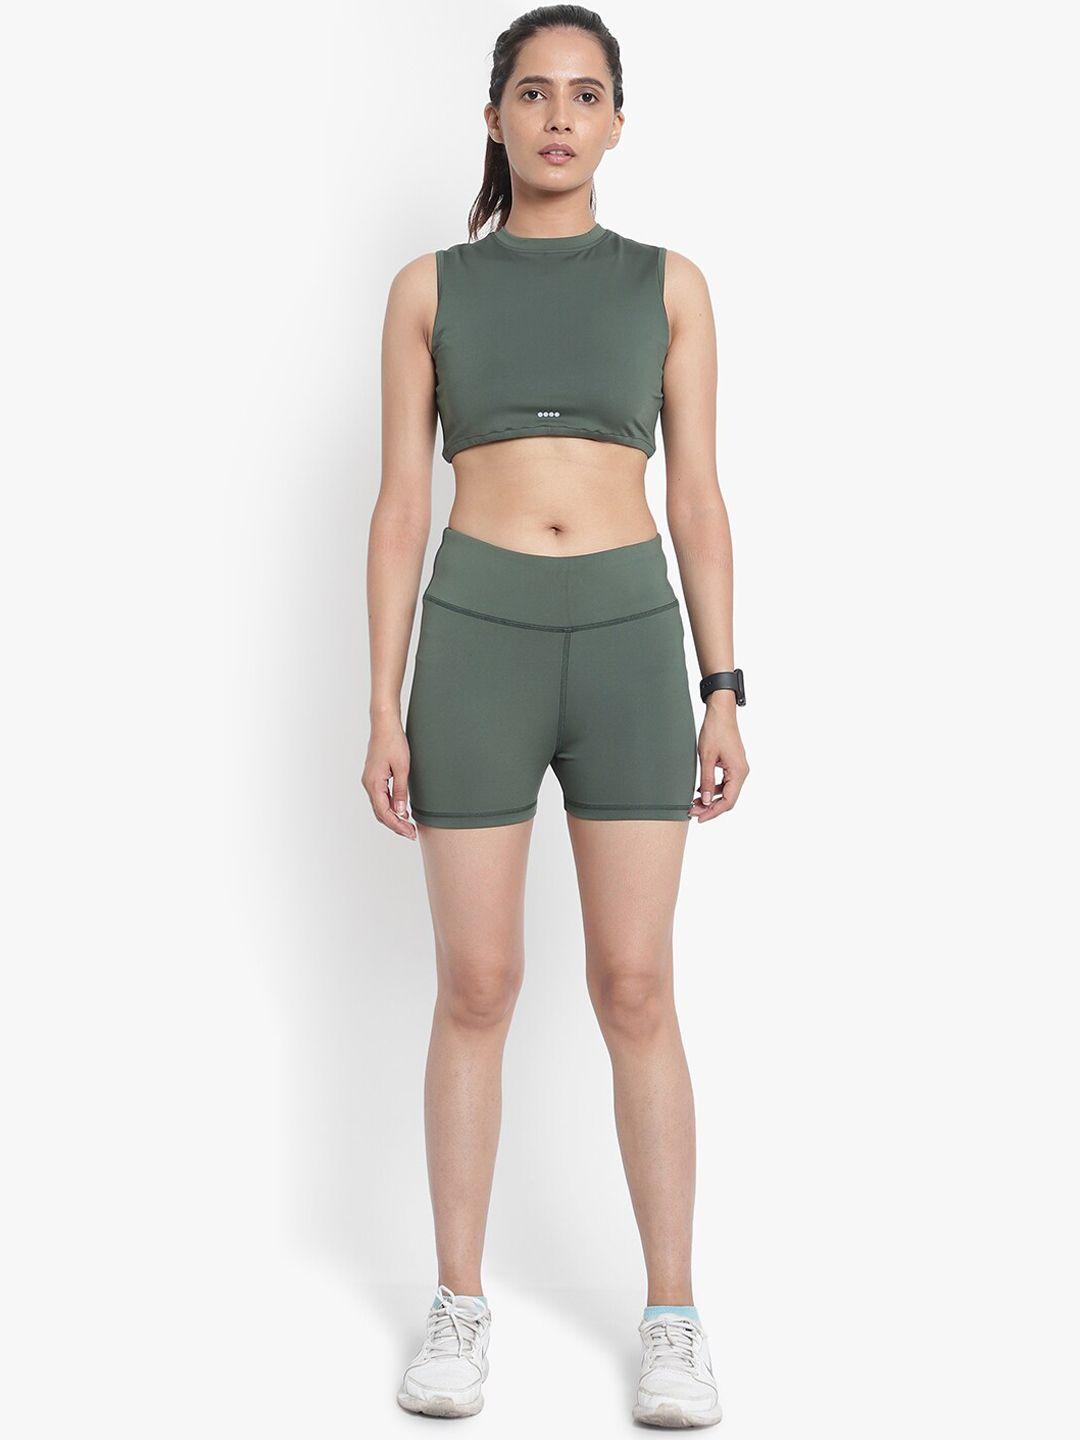 wearjukebox women olive green sports crop top with shorts